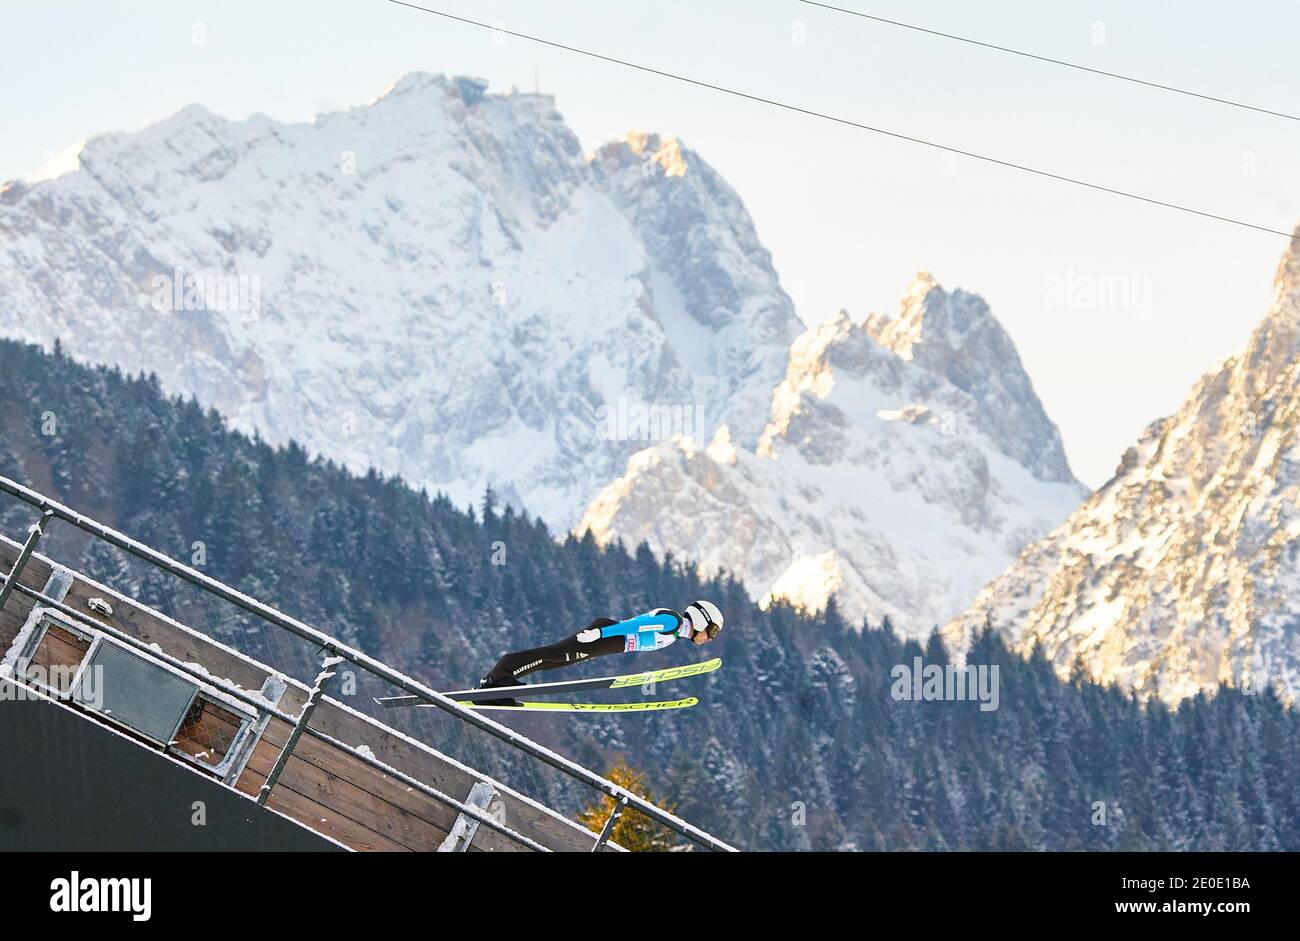 In front of Zugspitze mountain: Simon AMMANN, SUI in action at the Four Hills Tournament Ski Jumping at Olympic Stadium, Grosse Olympiaschanze in Garmisch-Partenkirchen, Bavaria, Germany, December 31, 2020.  © Peter Schatz / Alamy Live News Stock Photo